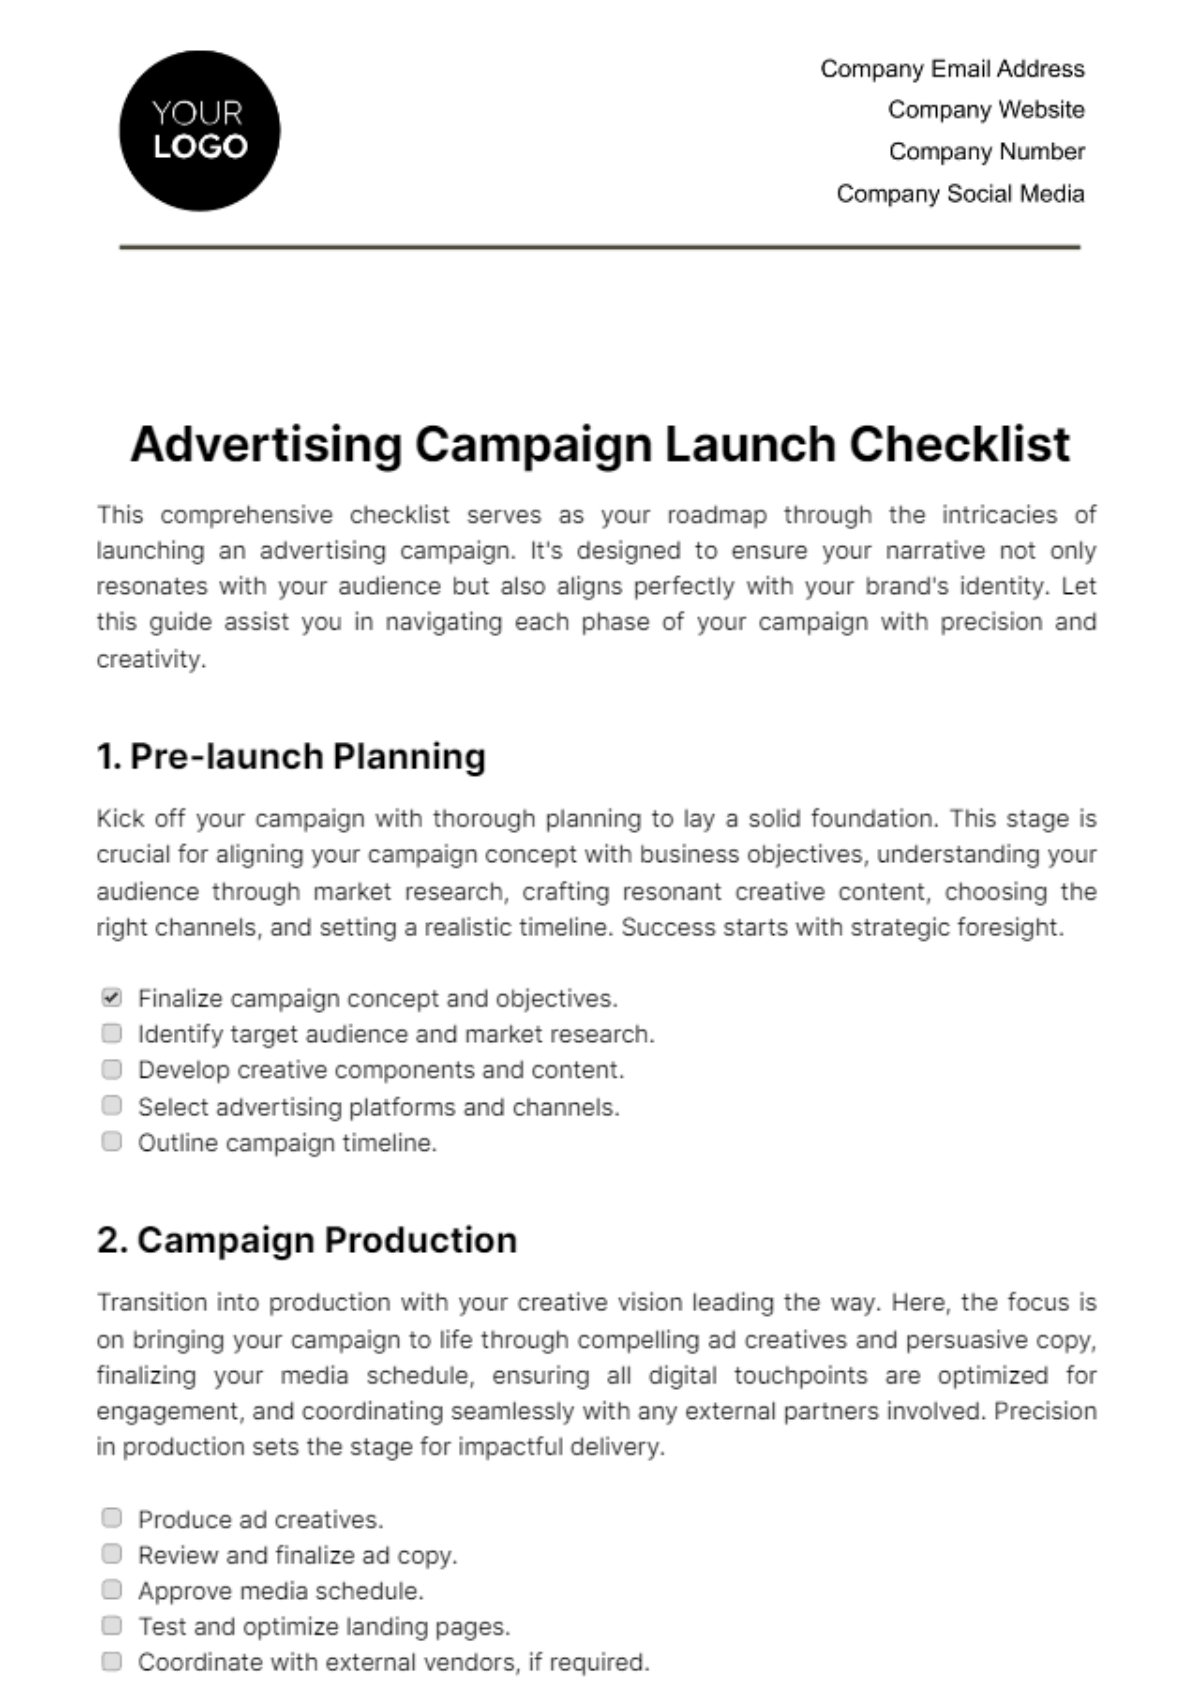 Advertising Campaign Launch Checklist Template